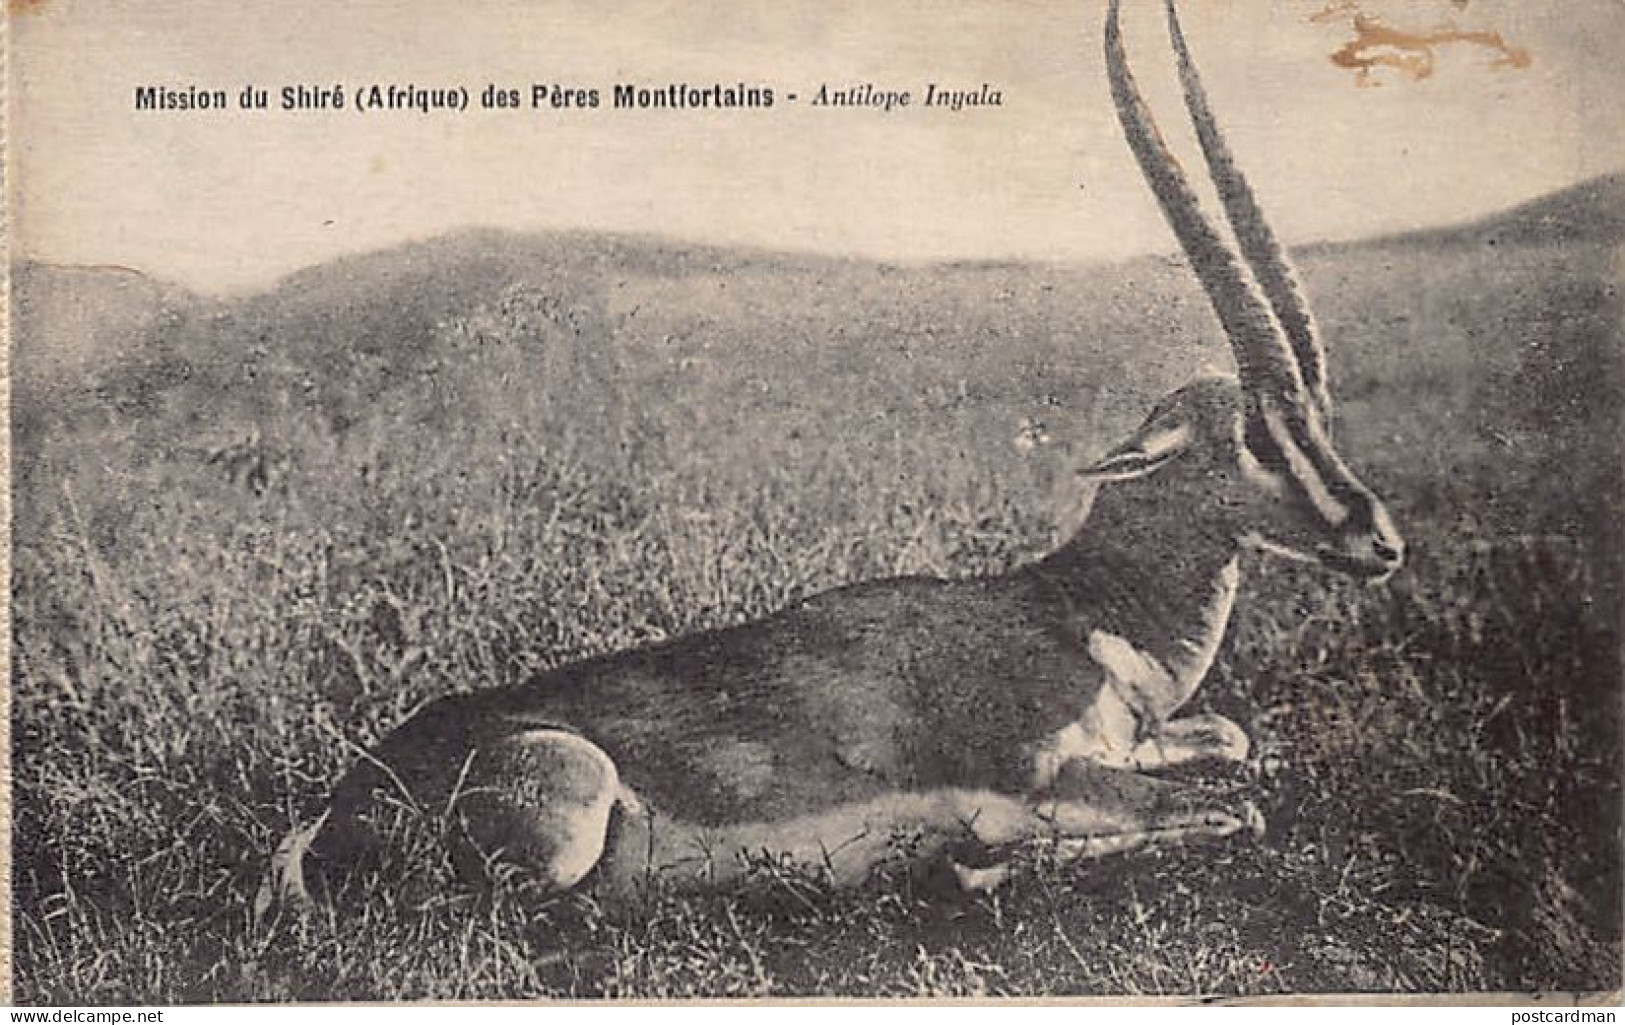 Malawi - Antelope Inyala - Publ. Mission Of The Shire Of The Montfort Fathers - Malawi